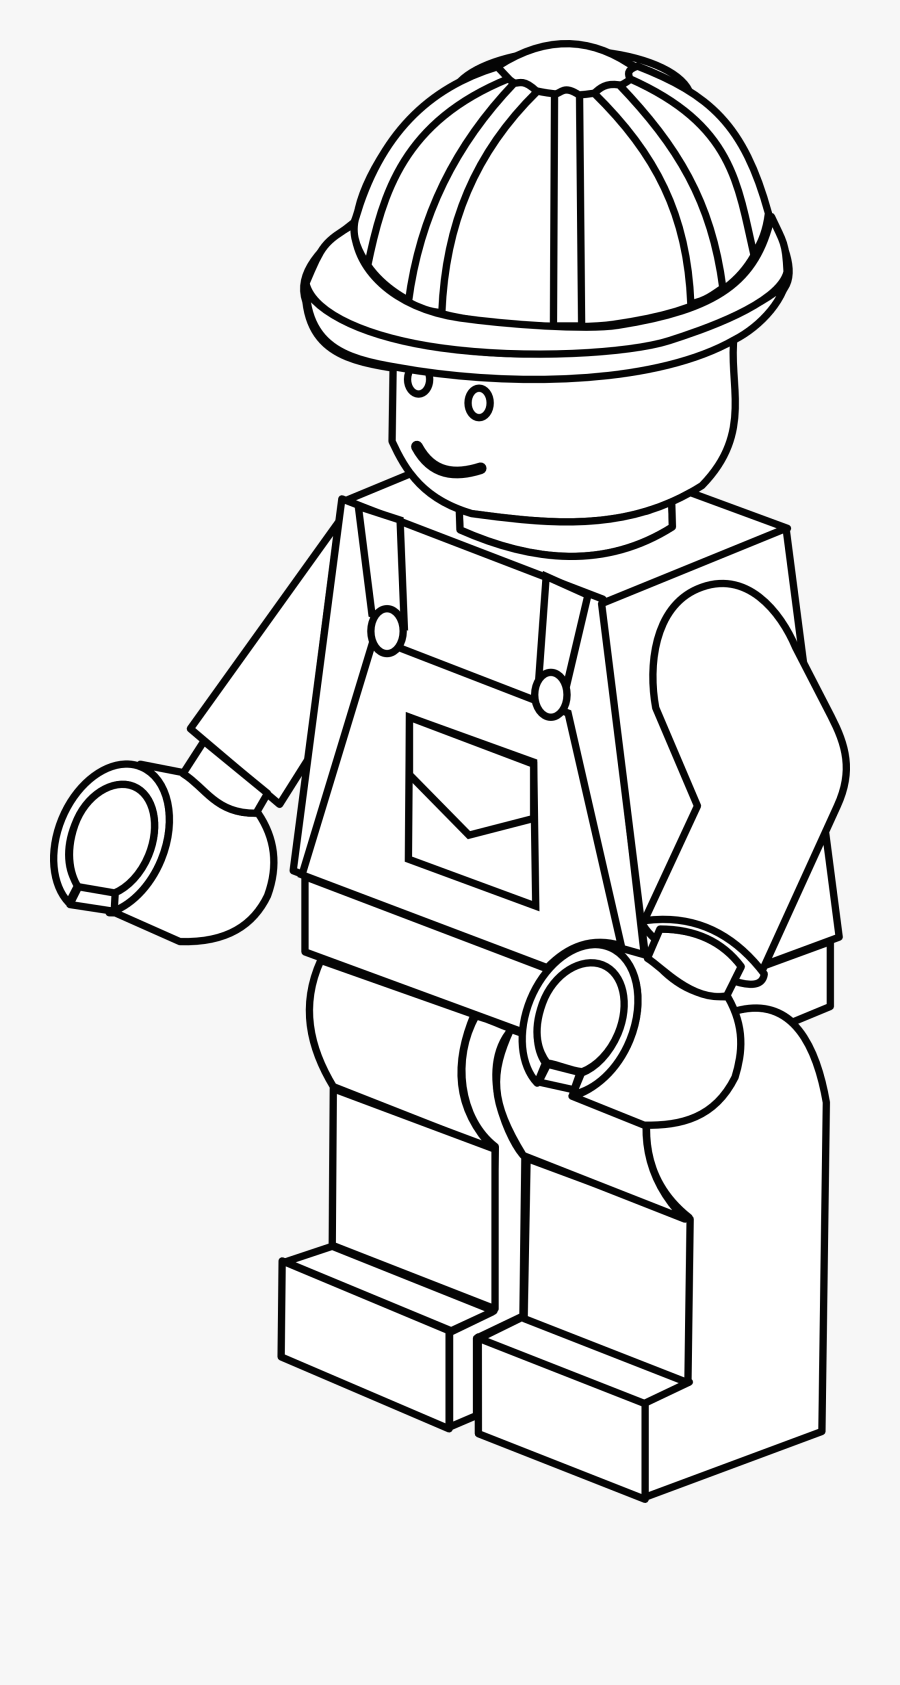 Legos Clipart Black And White - Lego Builder Coloring Pages, Transparent Clipart